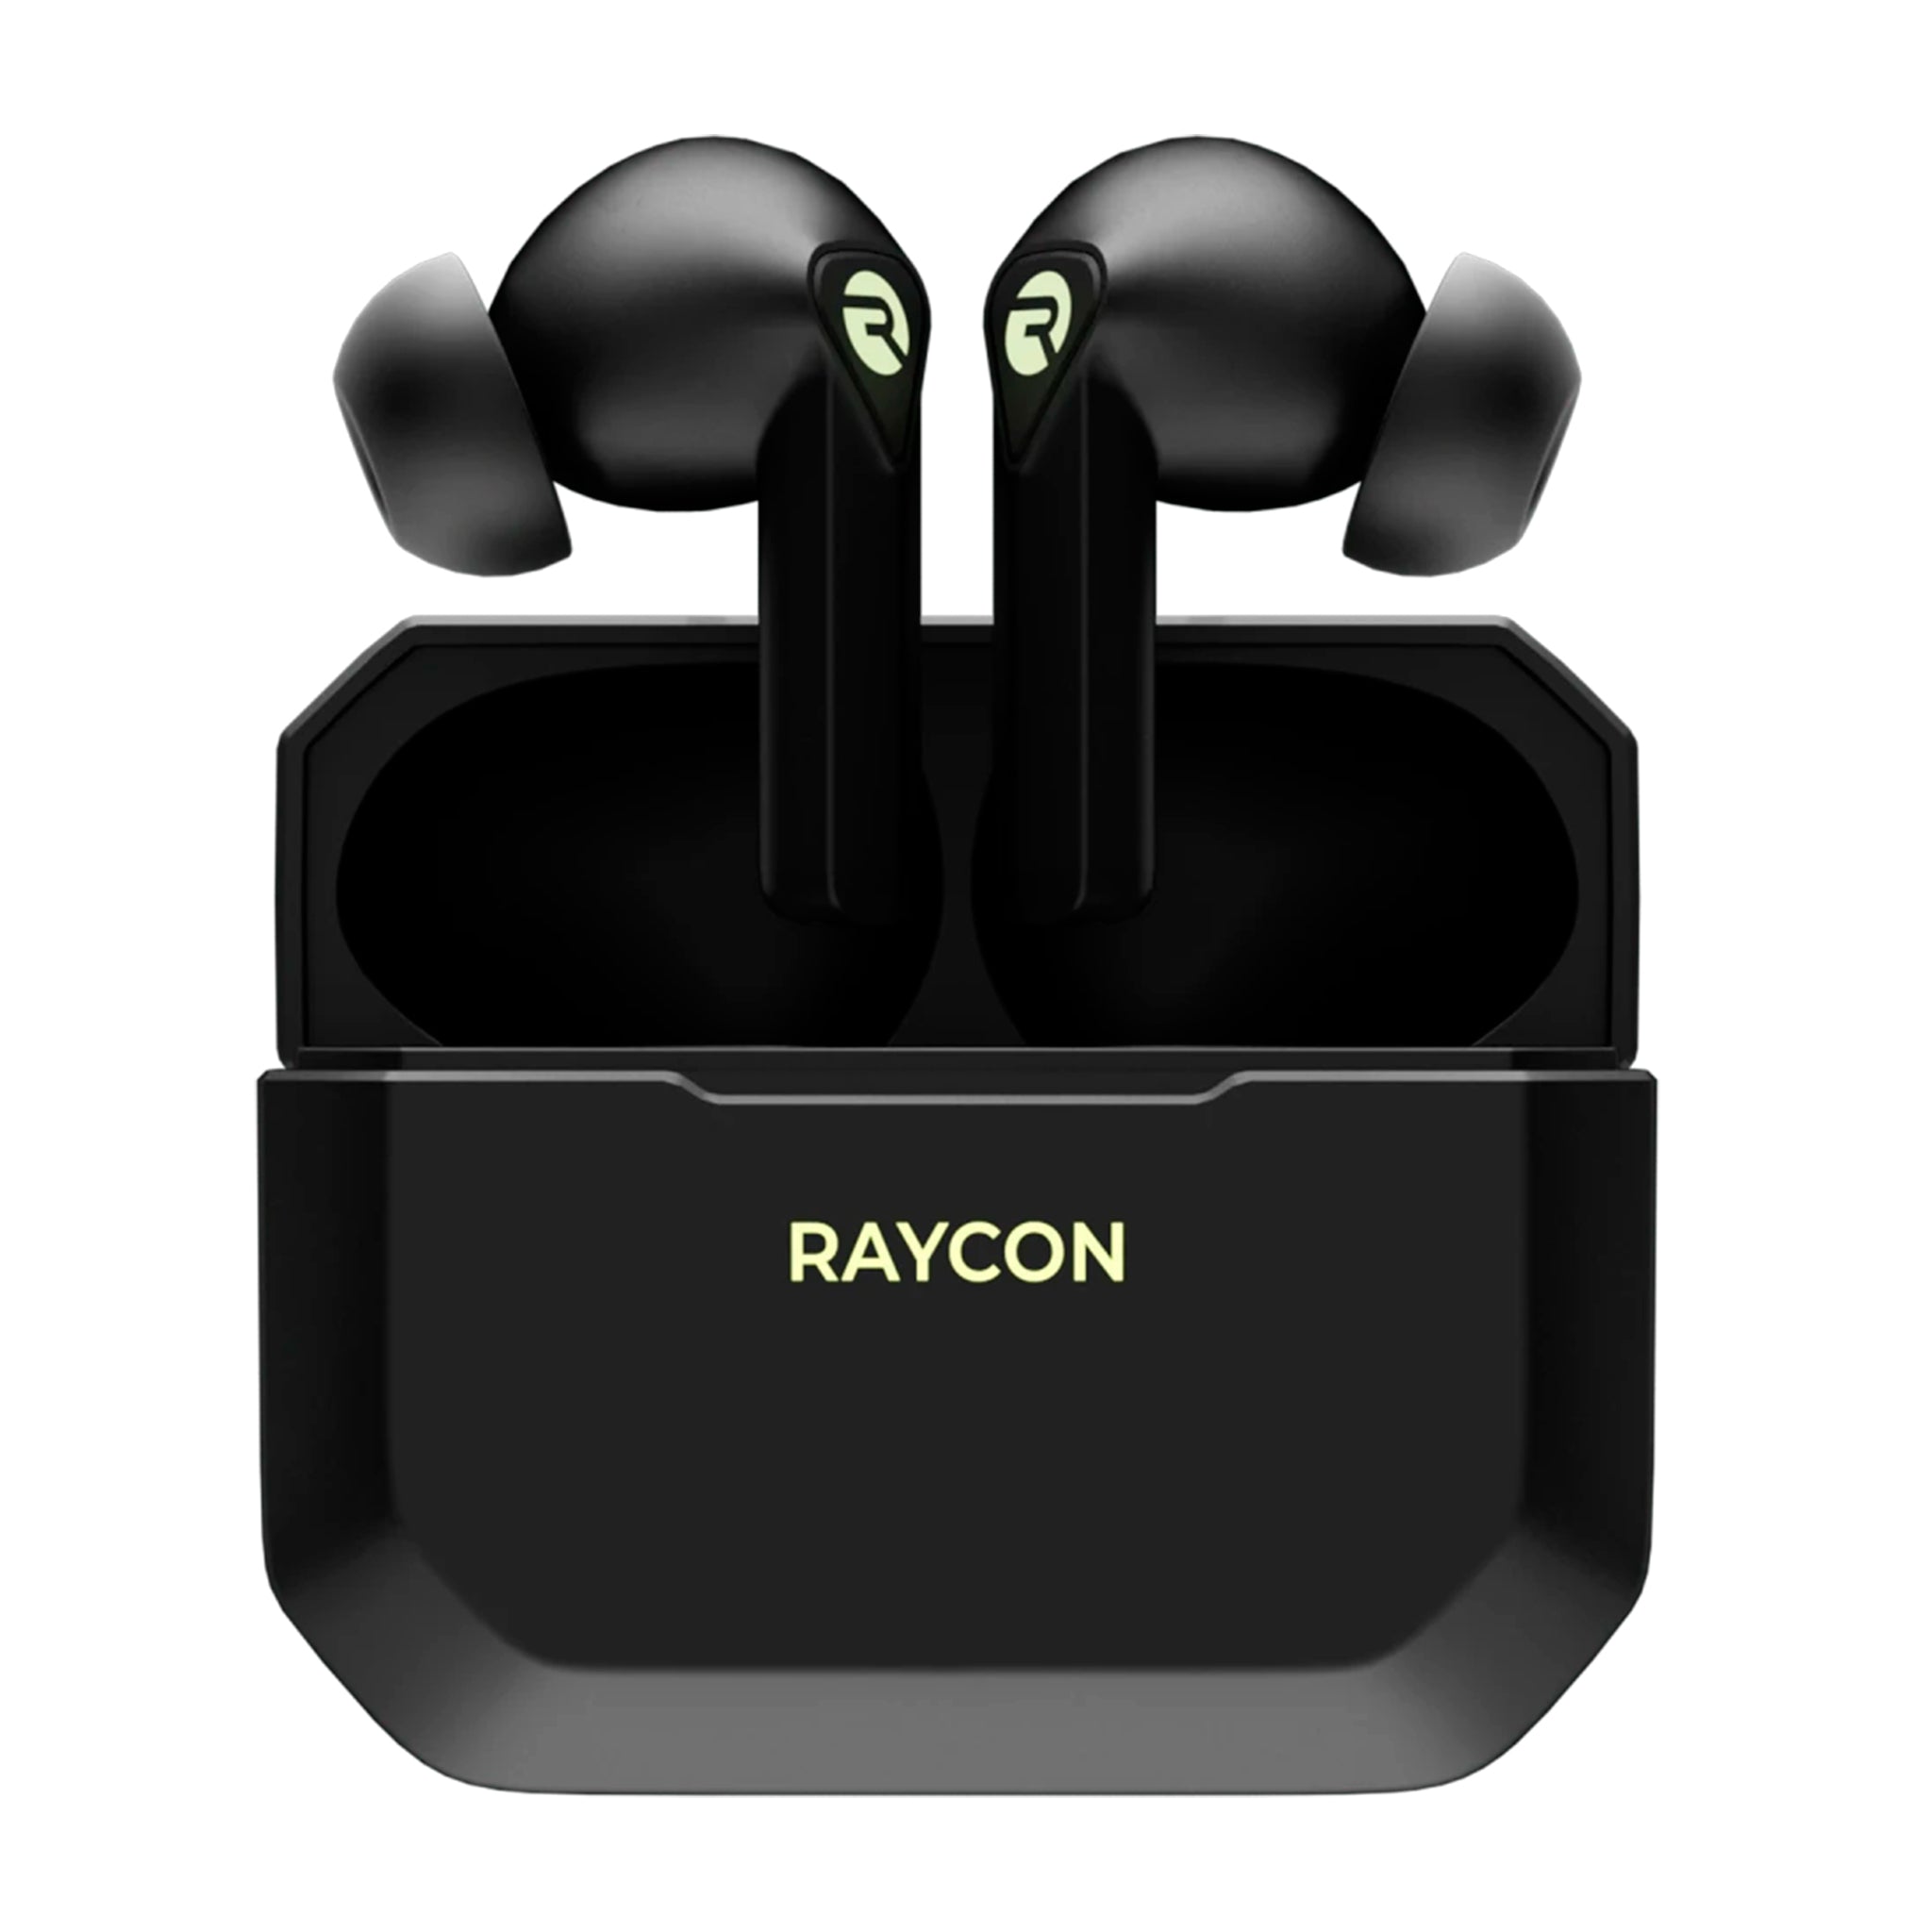 Raycon - The Gaming In Ear True Wireless Earbuds - Black